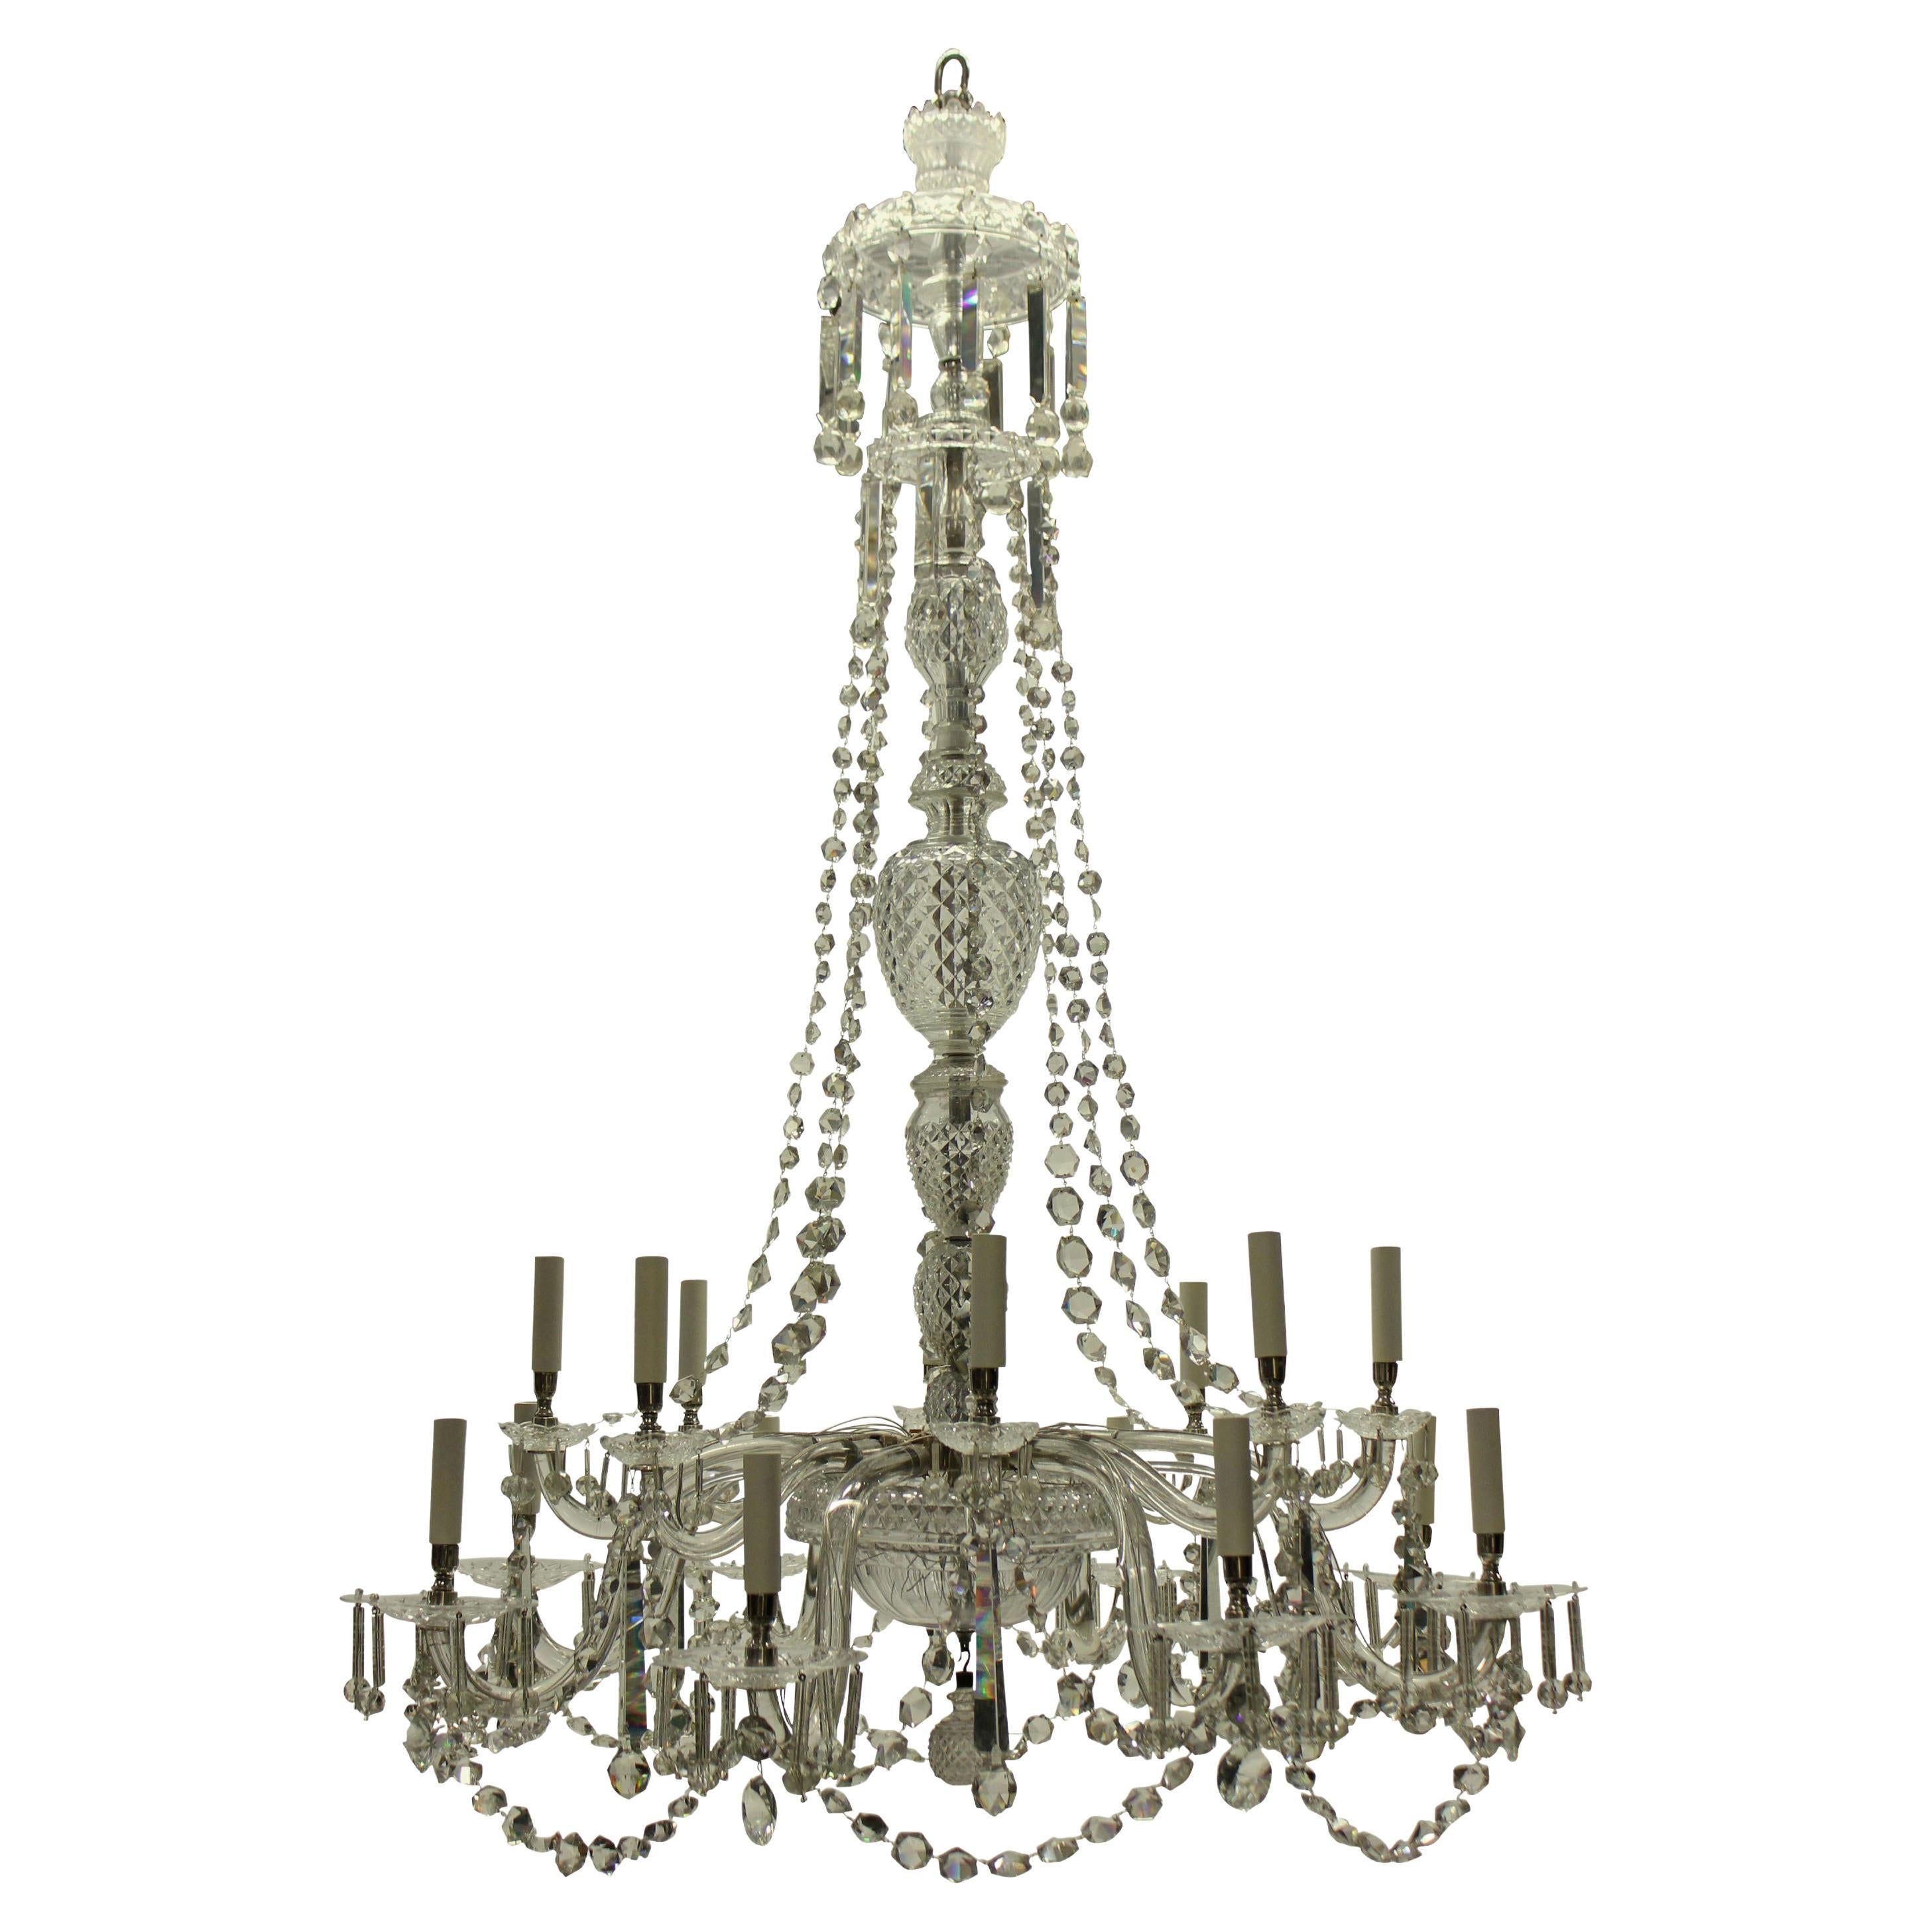 Large English Sixteen Arm Cut Glass, How To Lower Chandelier